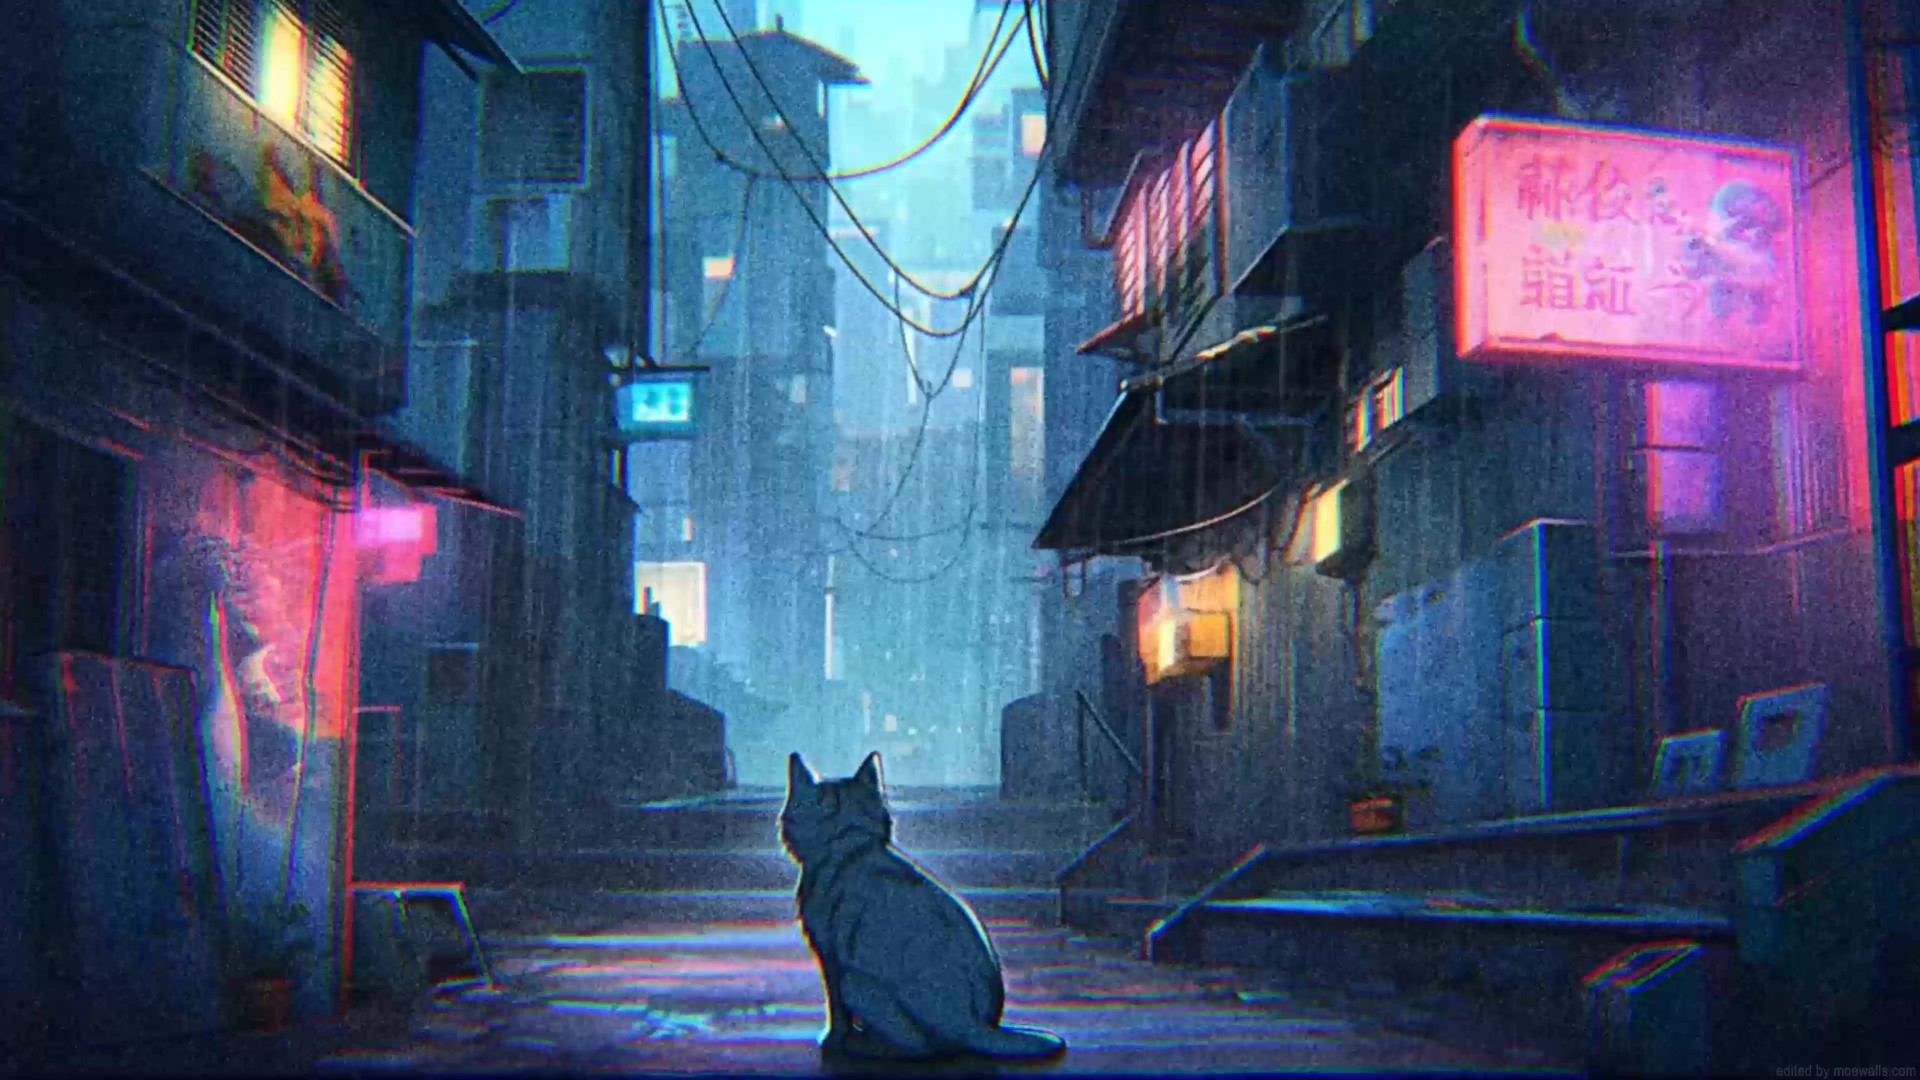 anime, shadow, alleyway, stores, sunset, vending machine, urban, Asia |  1360x768 Wallpaper - wallhaven.cc